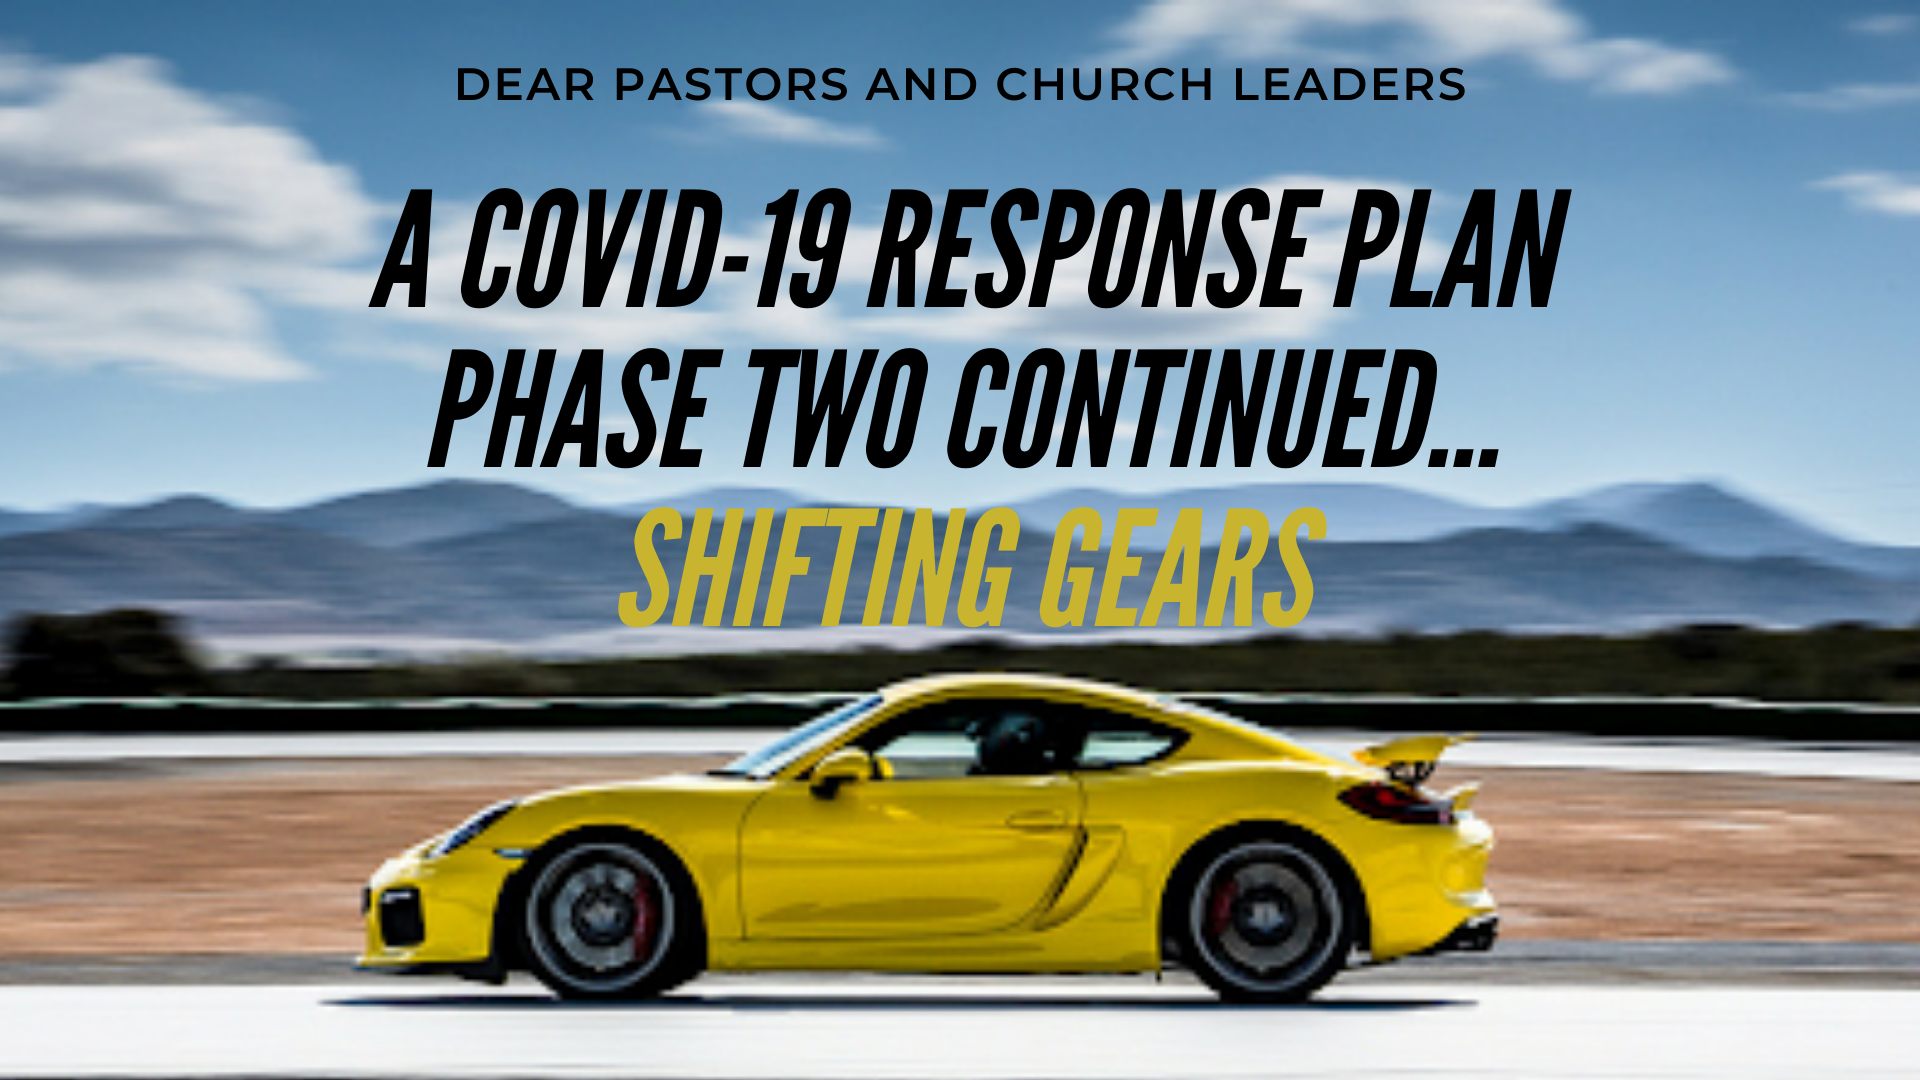 Shifting Gears: From Crisis Response to Strategic Planning